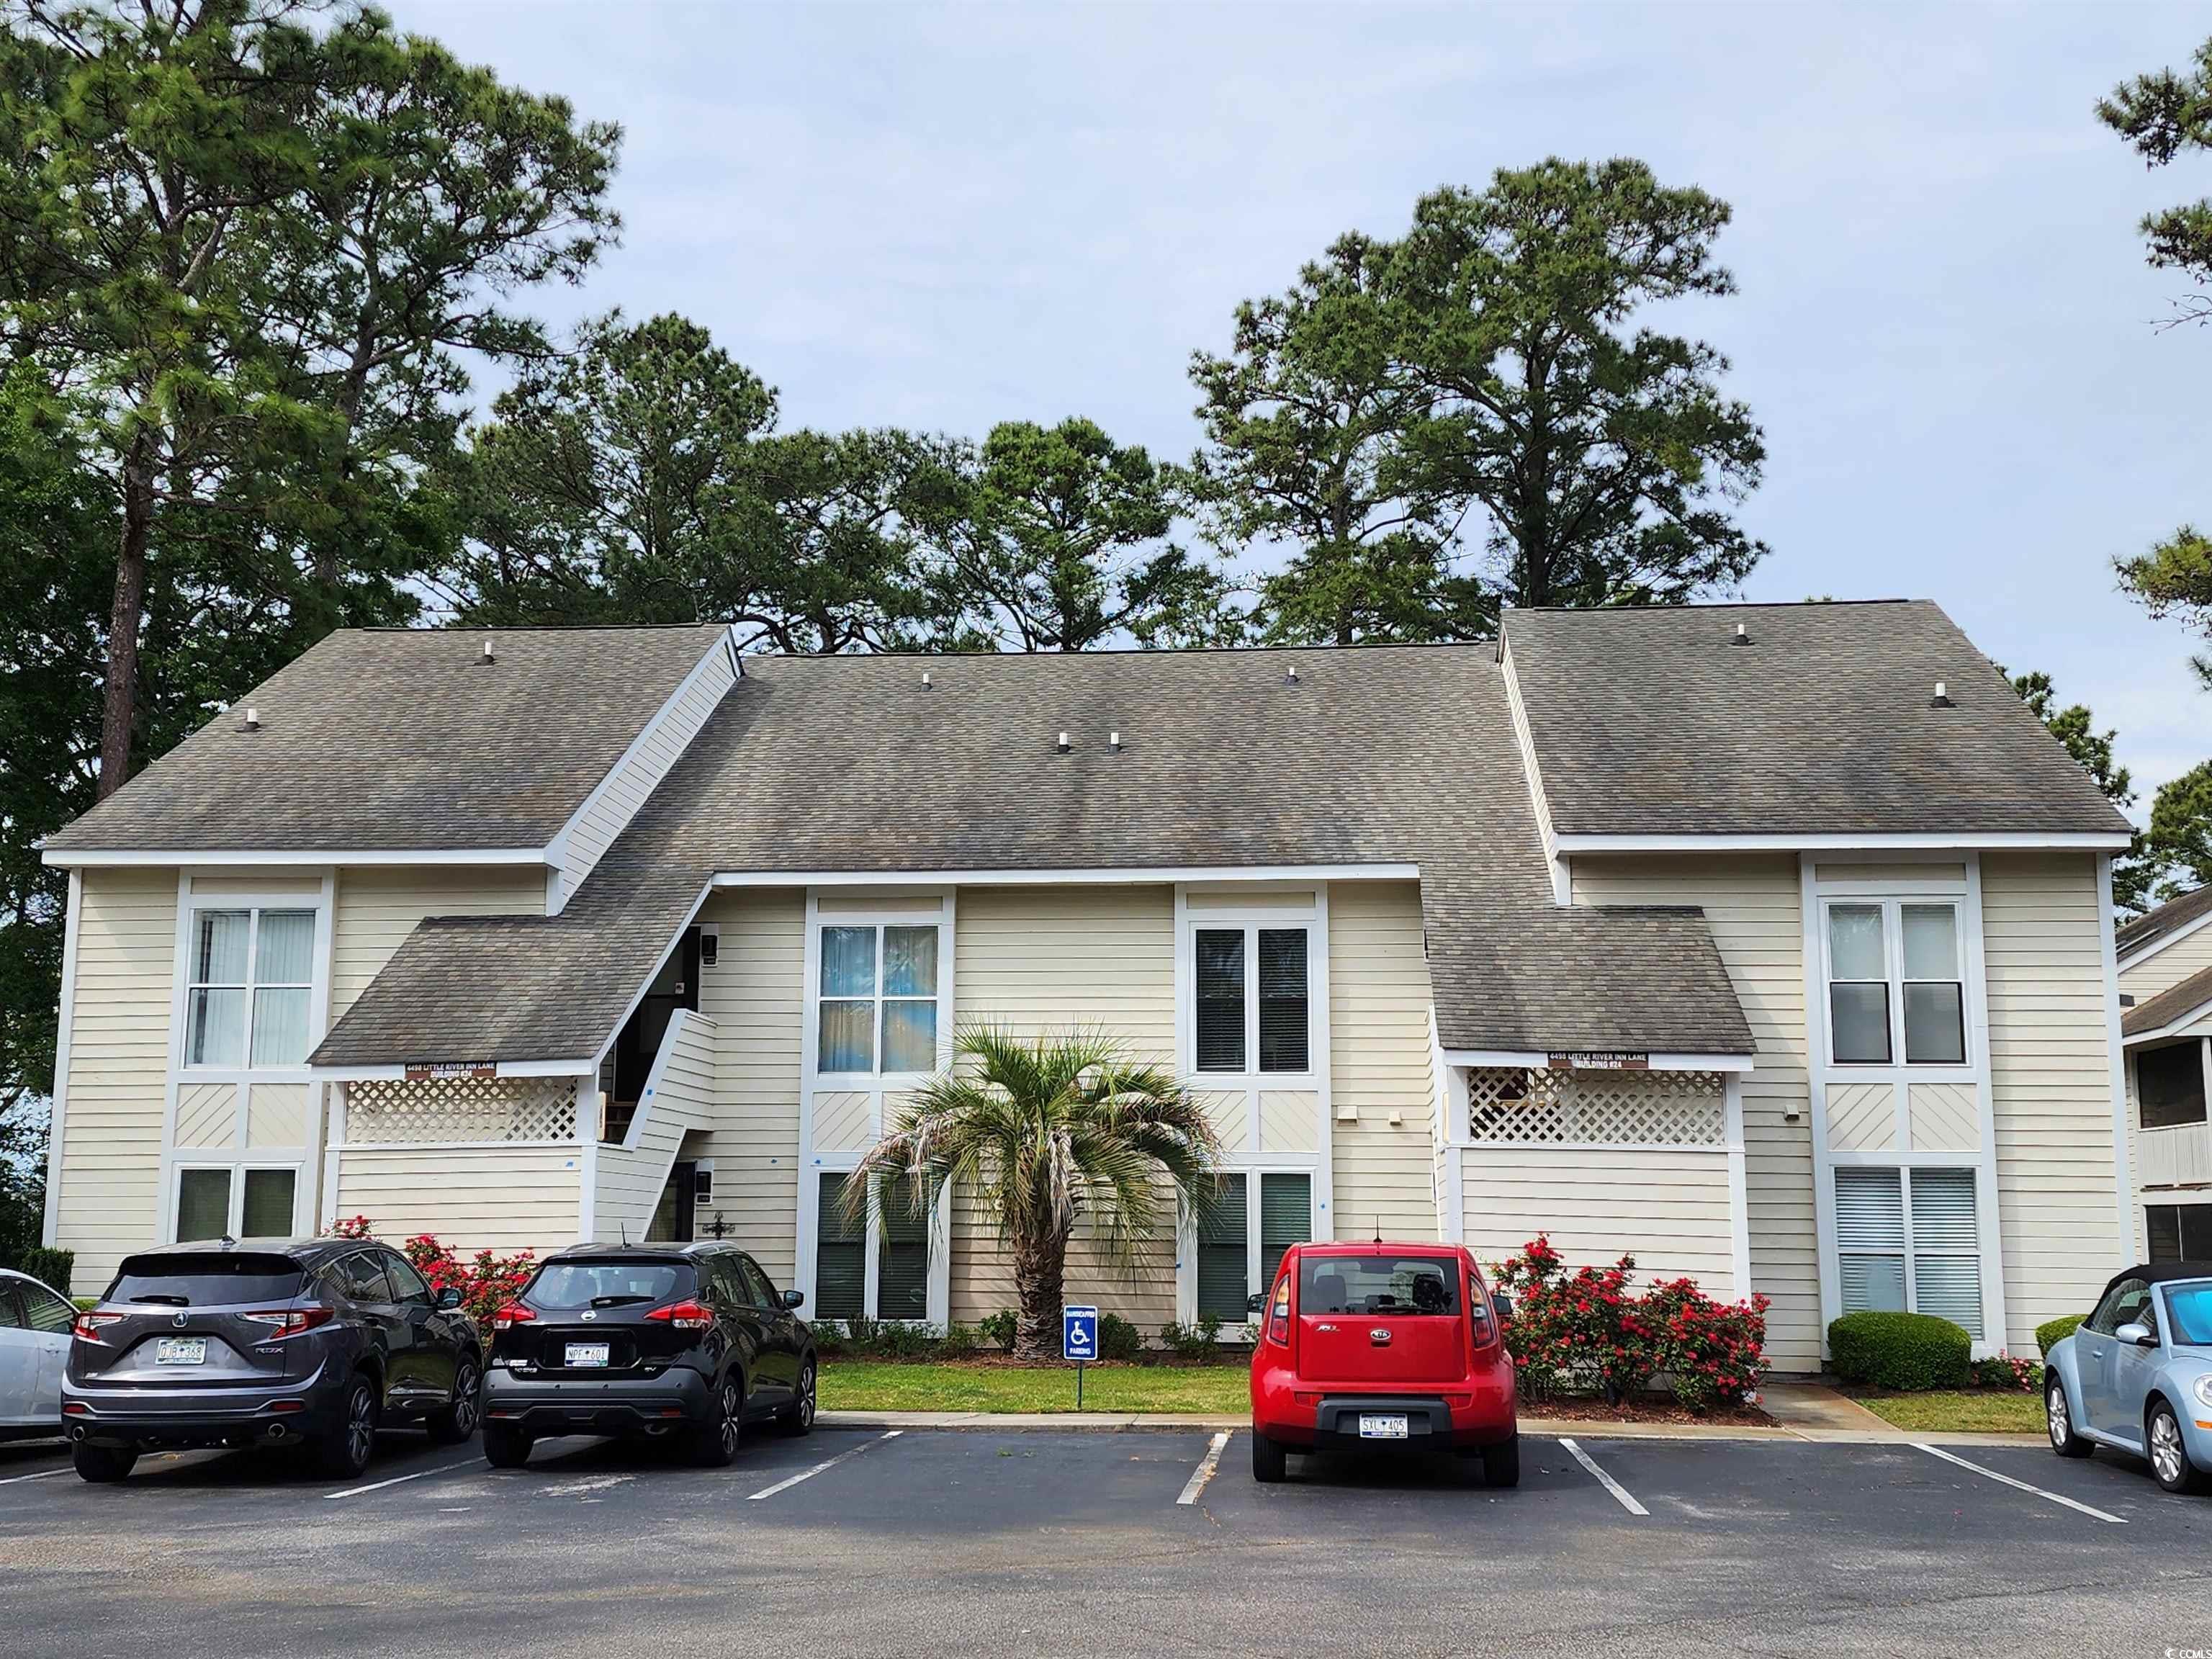 *open house saturday 4/27 1pm-3pm* welcome to the quaint community of little river inn resort conveniently located minutes to shopping, dining, and cherry grove beach. this 2 bedroom 2 bathroom condo will make the perfect primary home, second home, or investment property. walls have been recently painted, appliances updated in 2023, water heater replaced in 2020, hvac replaced in 2021. washer and dryer and all appliances convey. enjoy your morning coffee on the quiet balcony before enjoying a day at the beach.